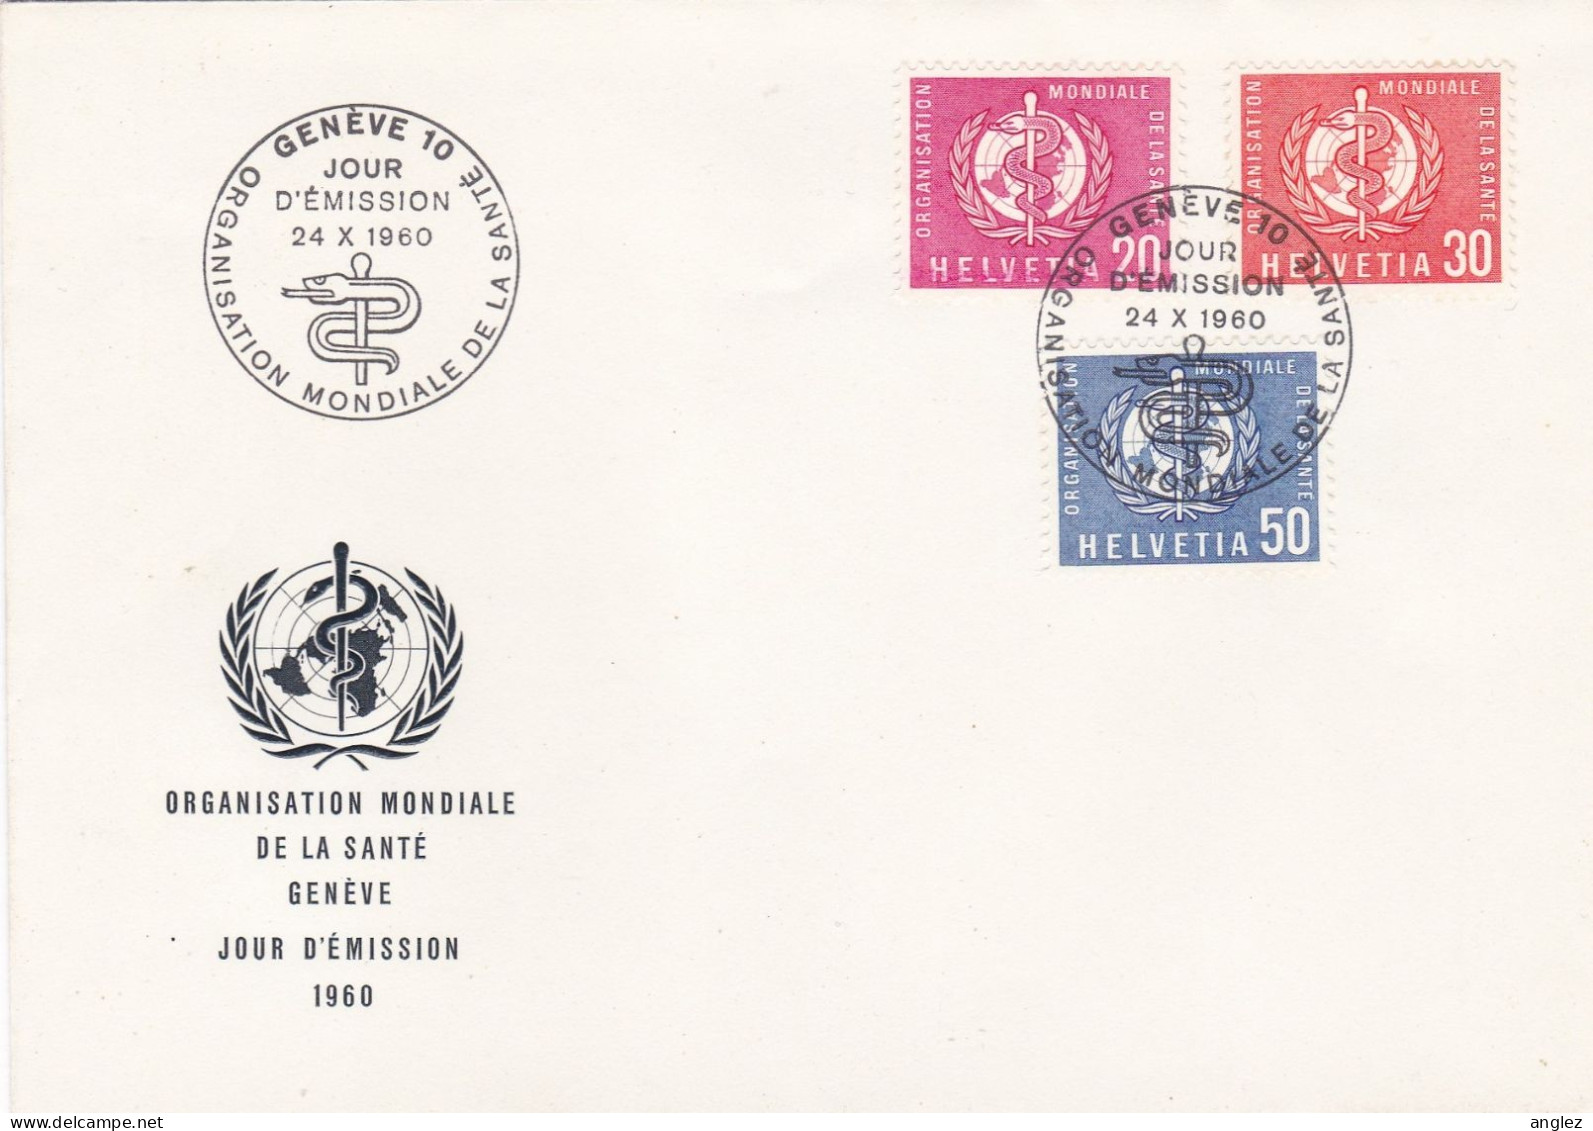 United Nations - Switzerland Geneva Office 1960 WHO / OMS Definitives FDC - FDC